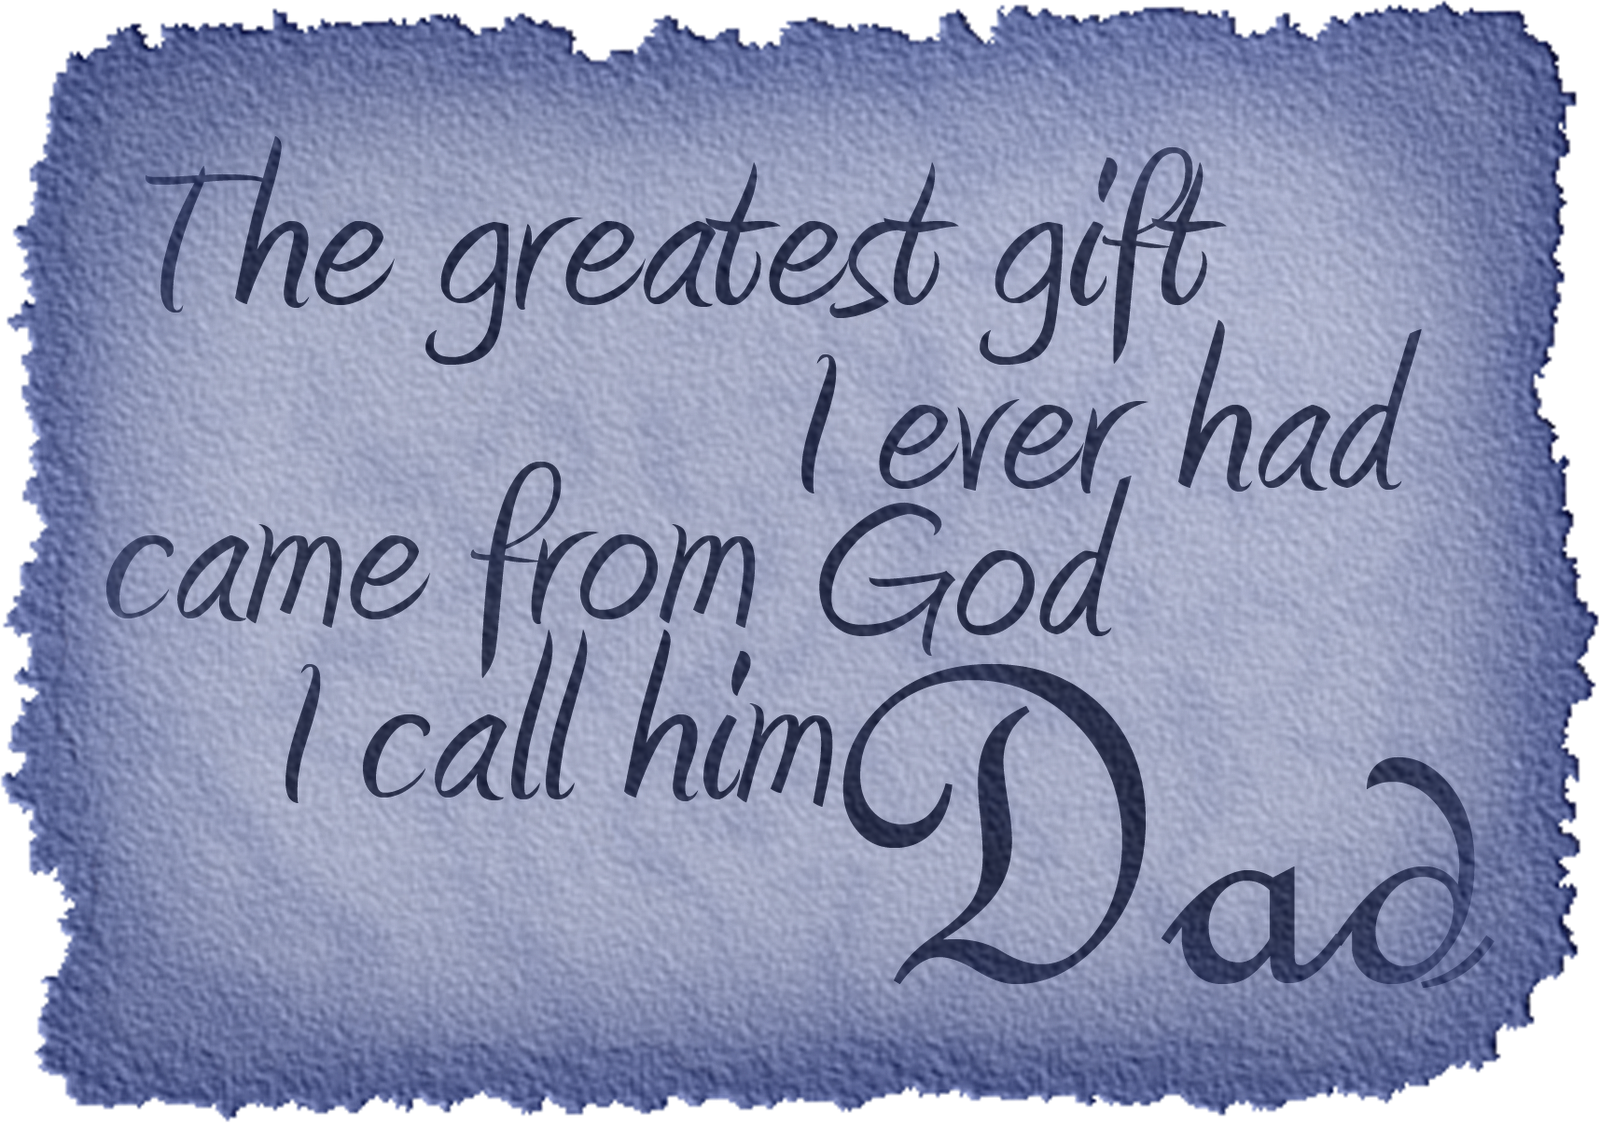 Fathers Day Cards 2013 | Messages Love
